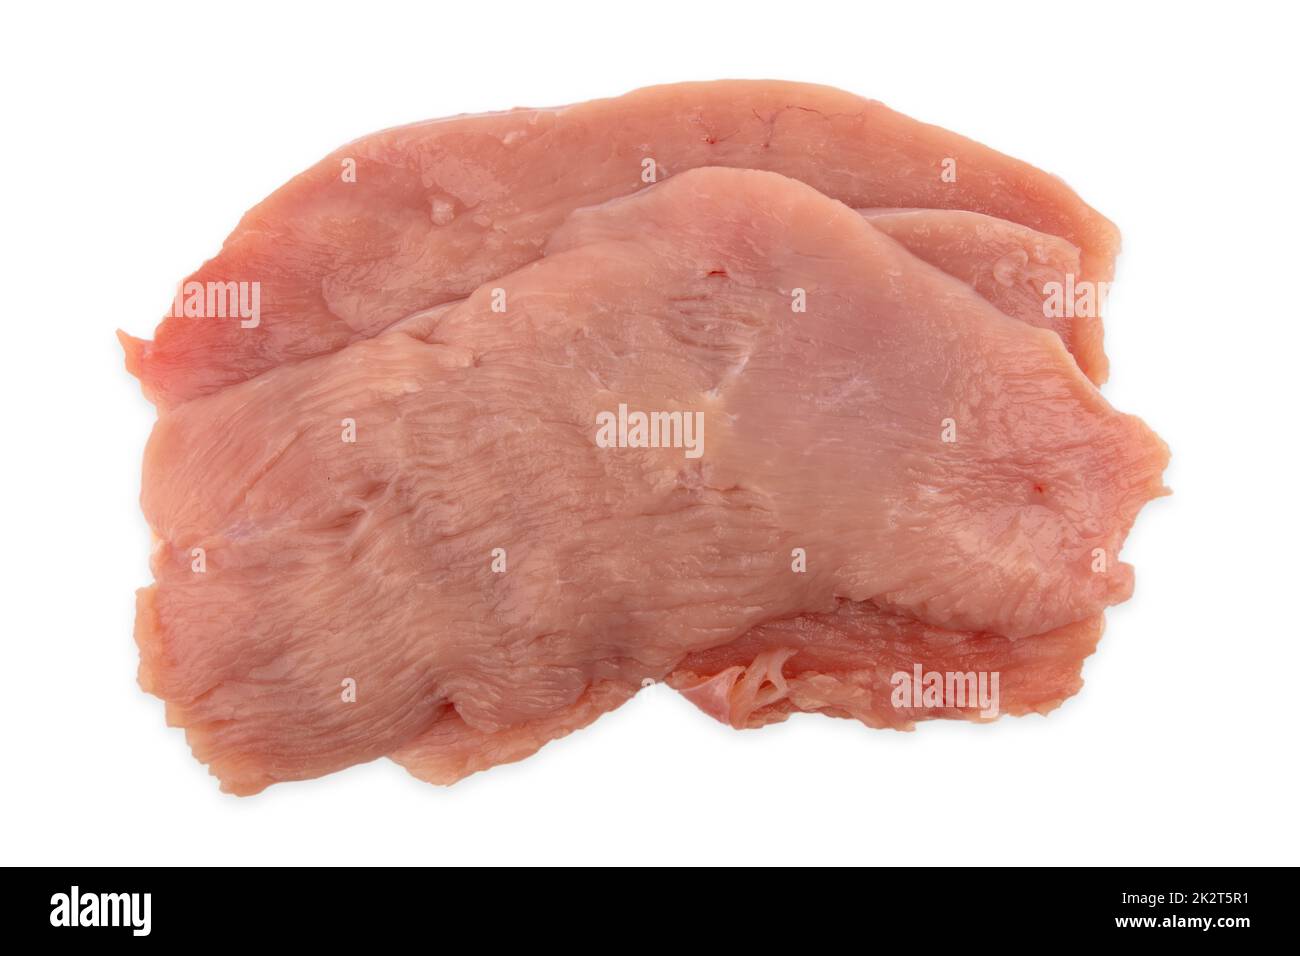 Raw Poultry Schnitzel Meat isolated over white background Stock Photo